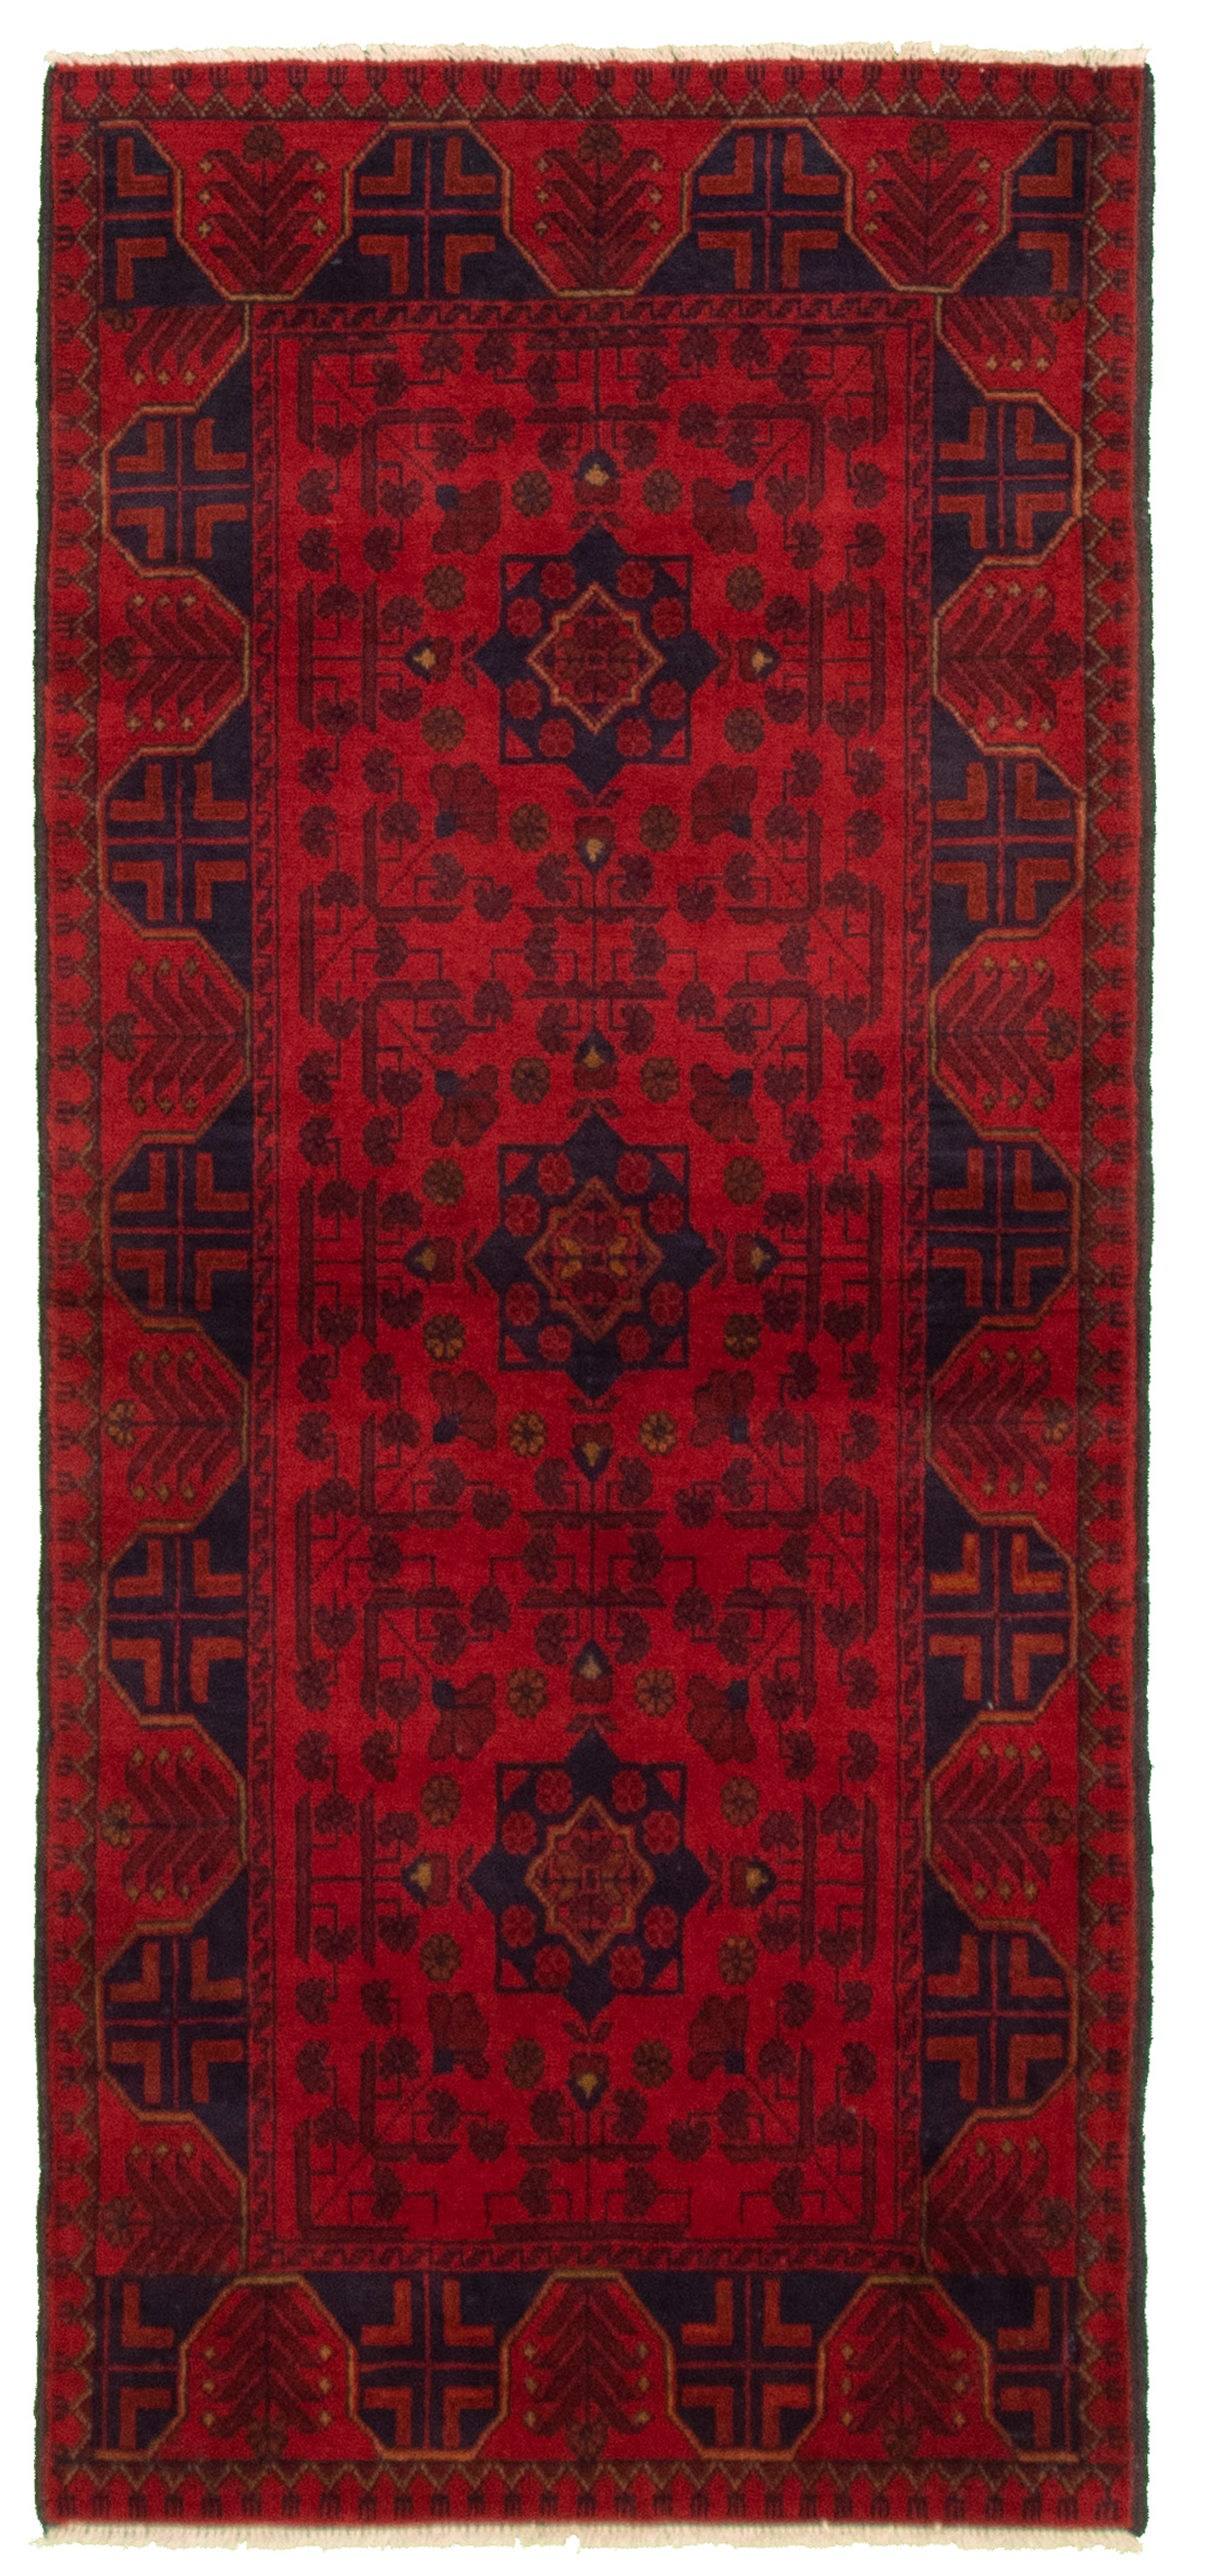 Hand-knotted Finest Khal Mohammadi Red  Rug 2'8" x 6'0"  Size: 2'8" x 6'0"  